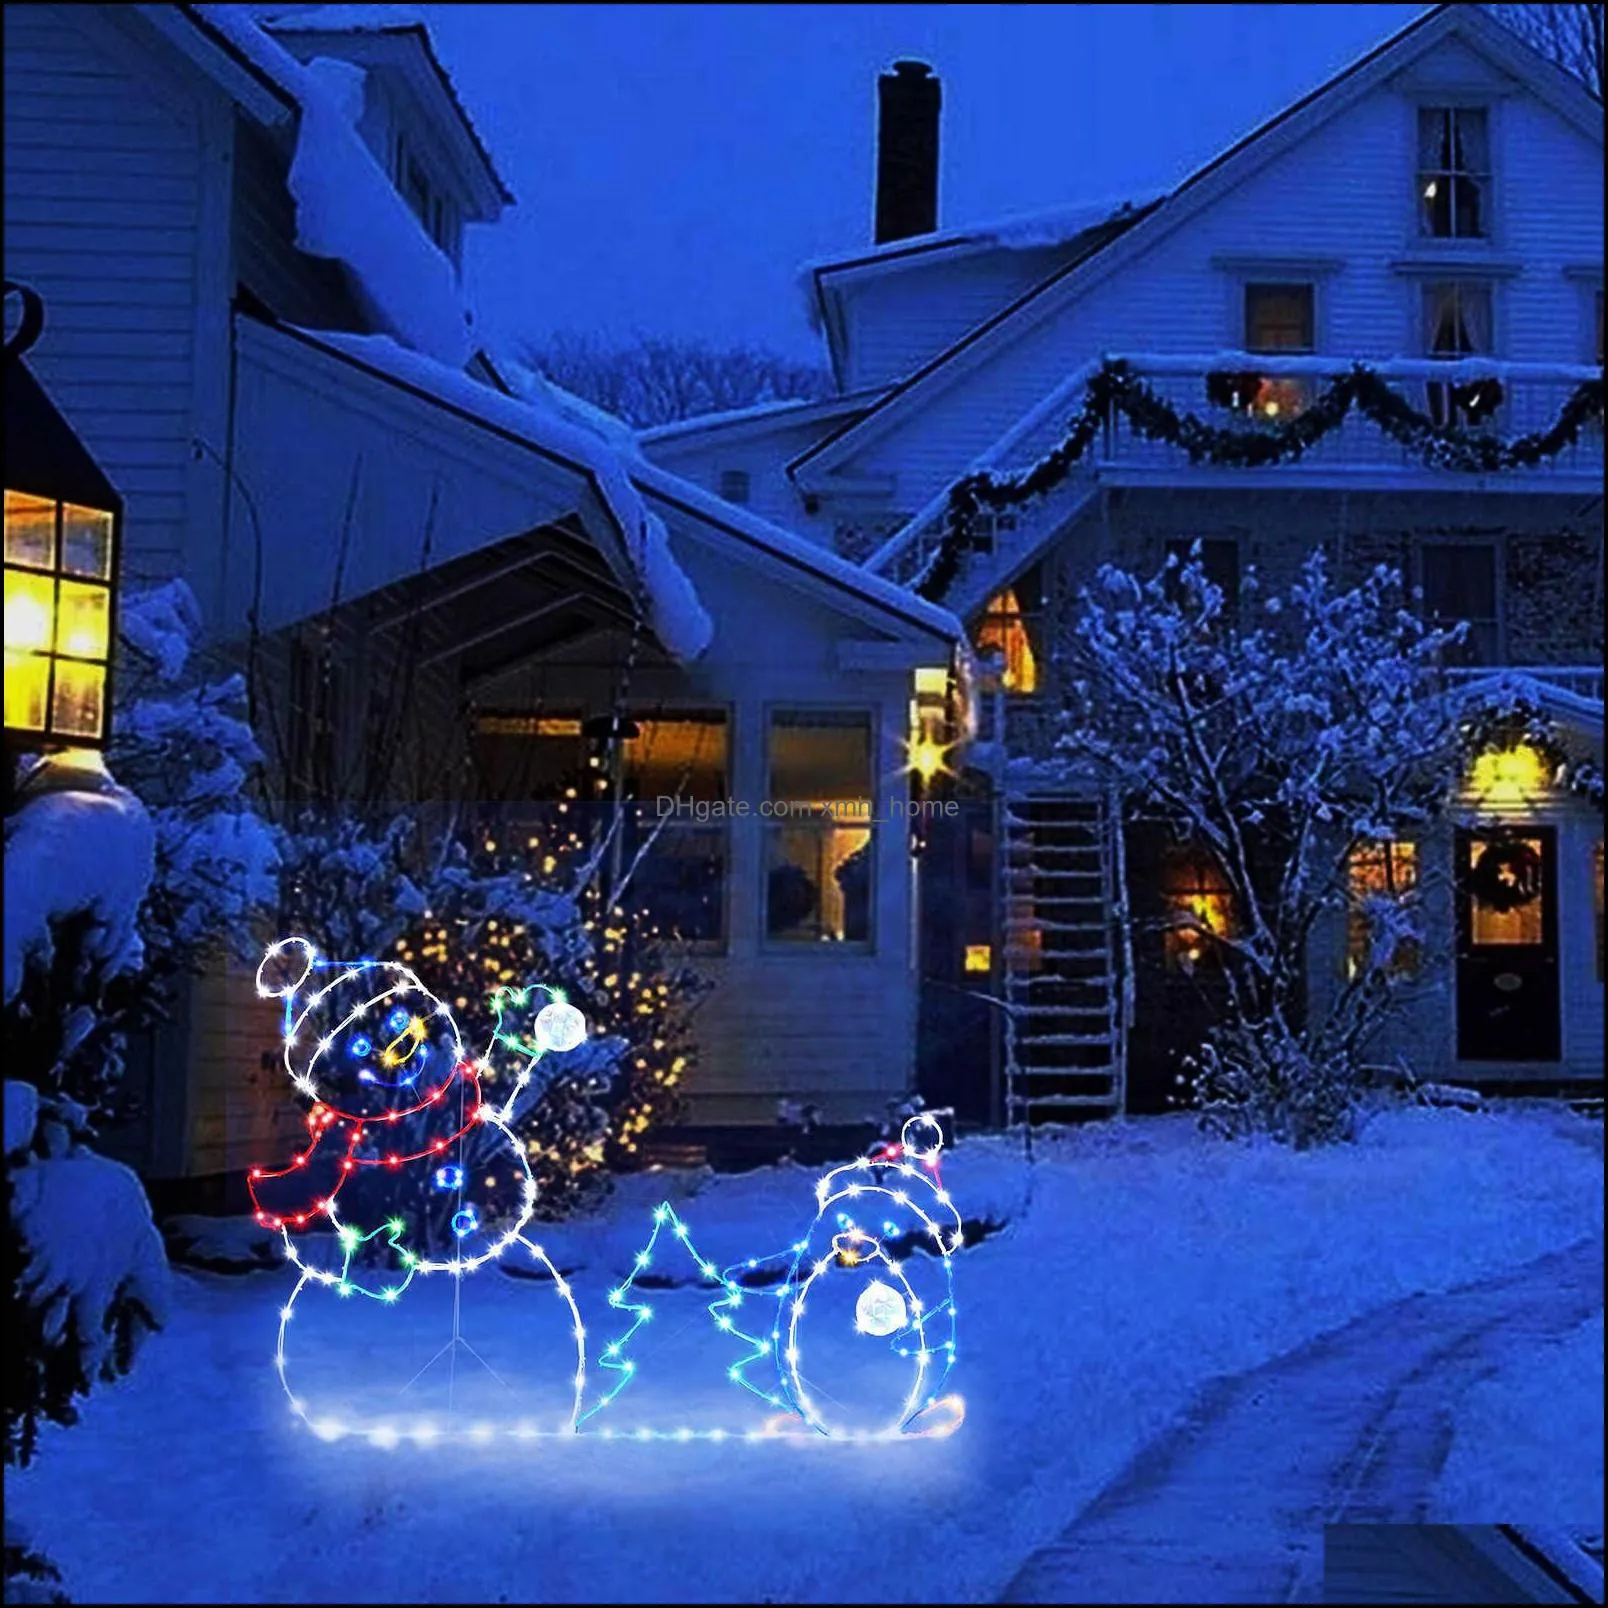 fun animated snowball fight active light string frame decor holiday party christmas outdoor garden snow glowing decorative sign h1020